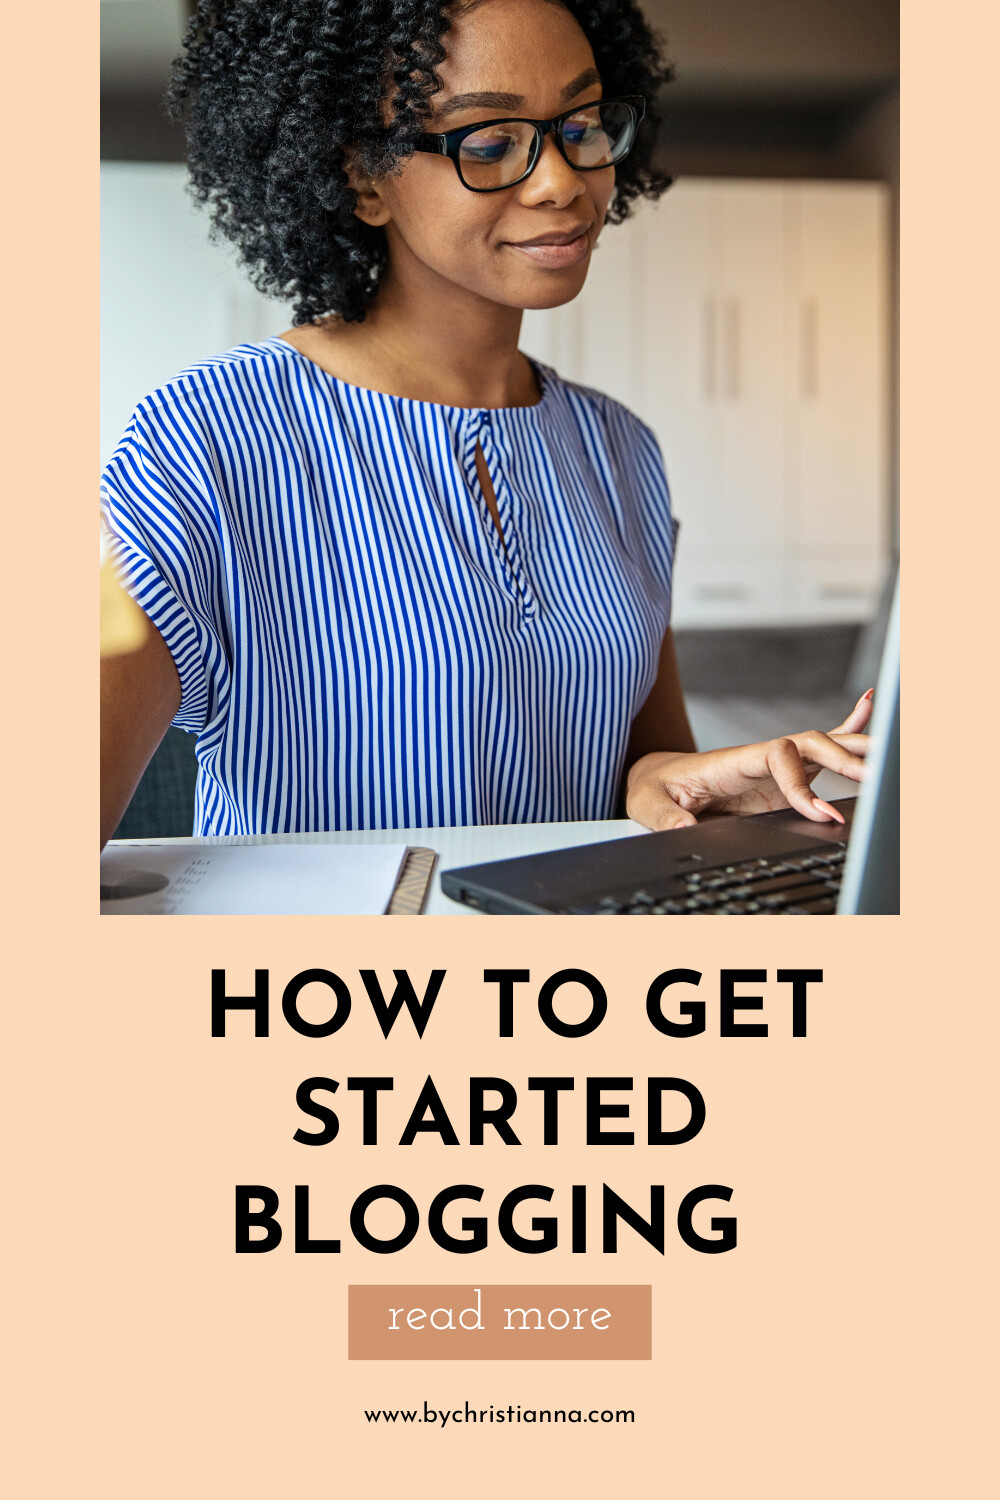 How to Get Started Blogging